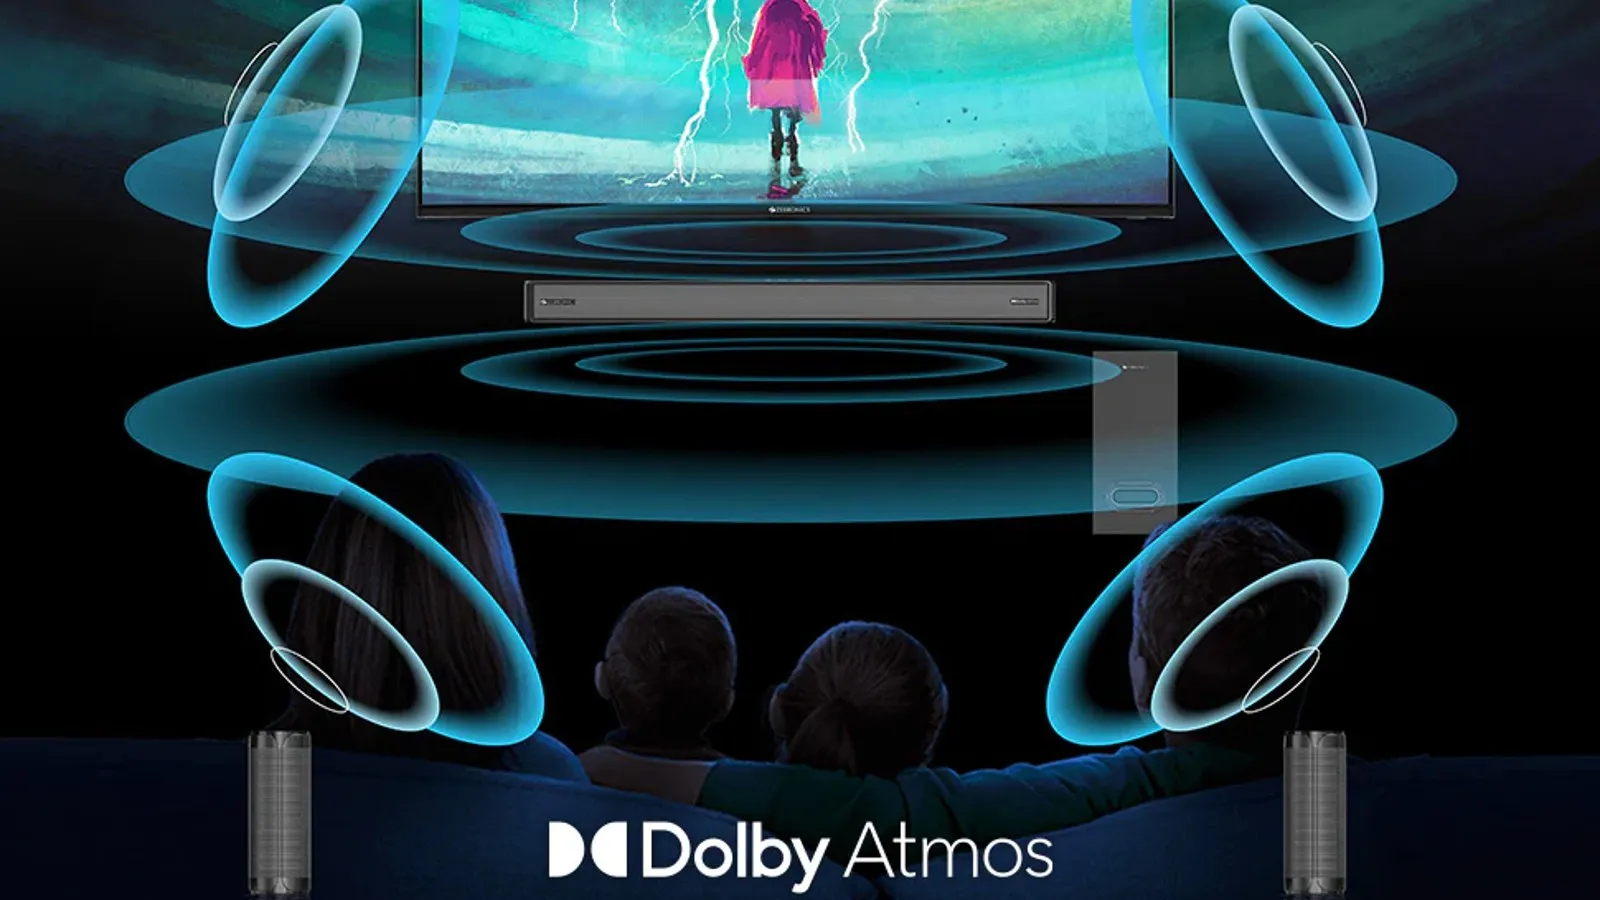 Why you need Dolby Atmos, the sound technology that brings movies to life